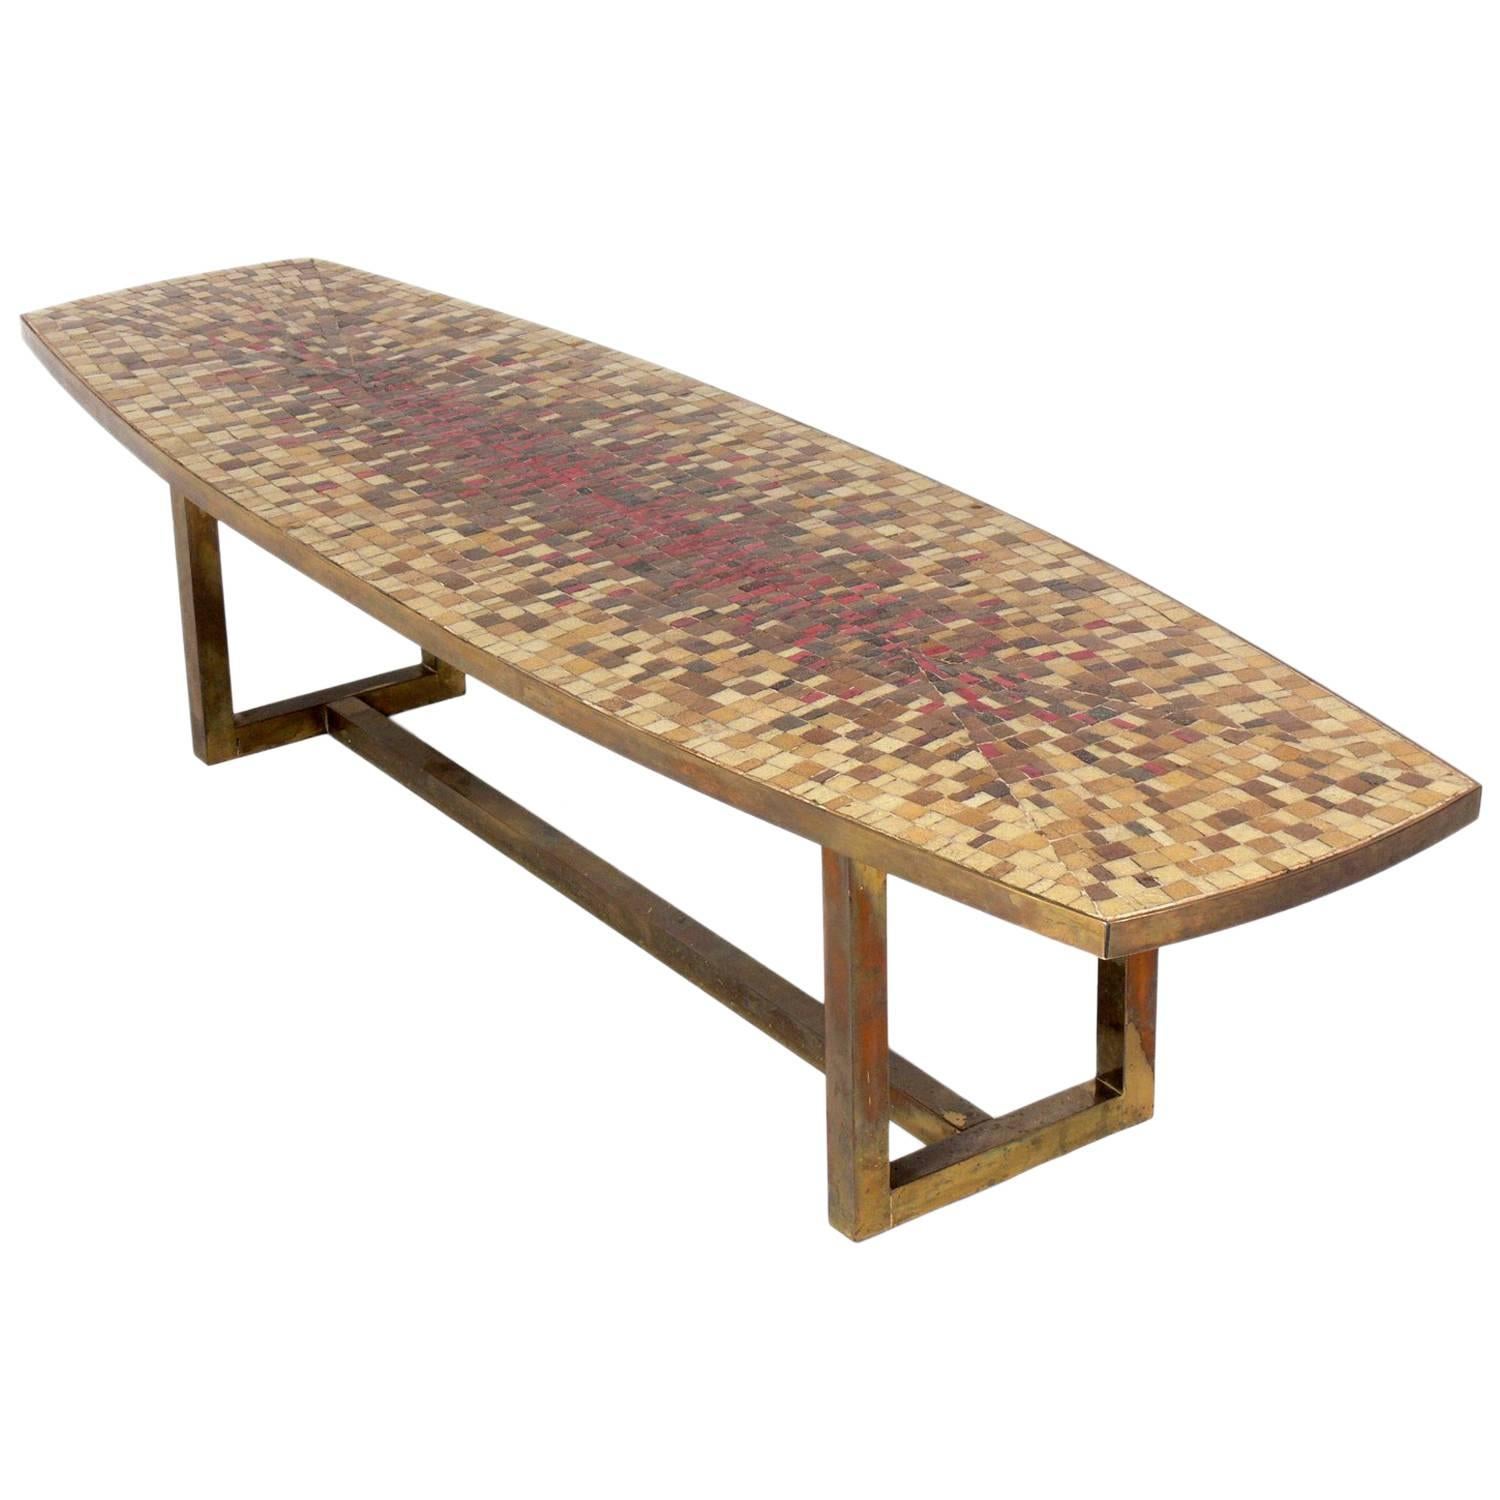 Midcentury Italian Glass Mosaic Tile and Brass Coffee Table